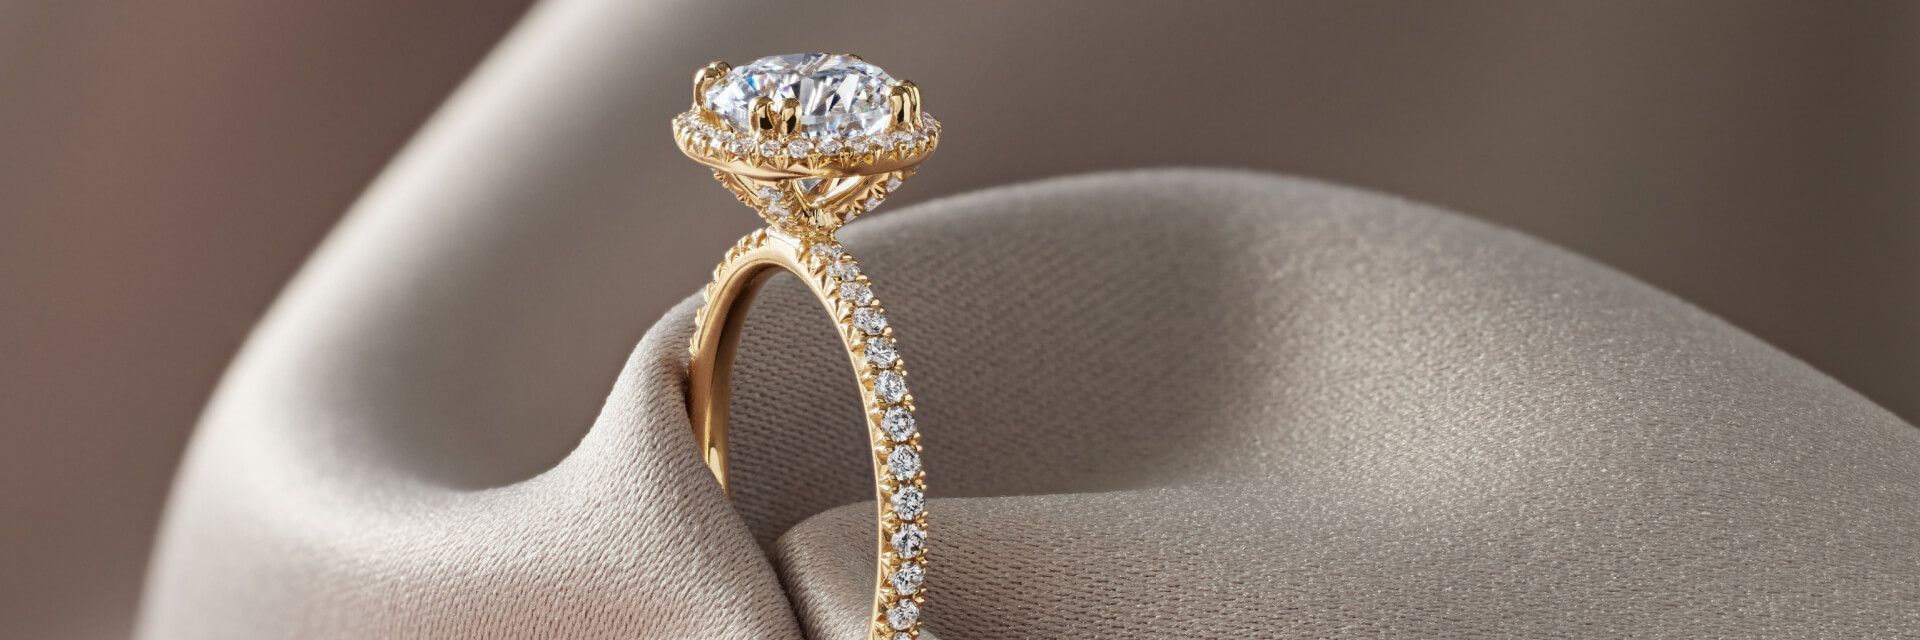 Things You Should Know About Custom Wedding Rings 